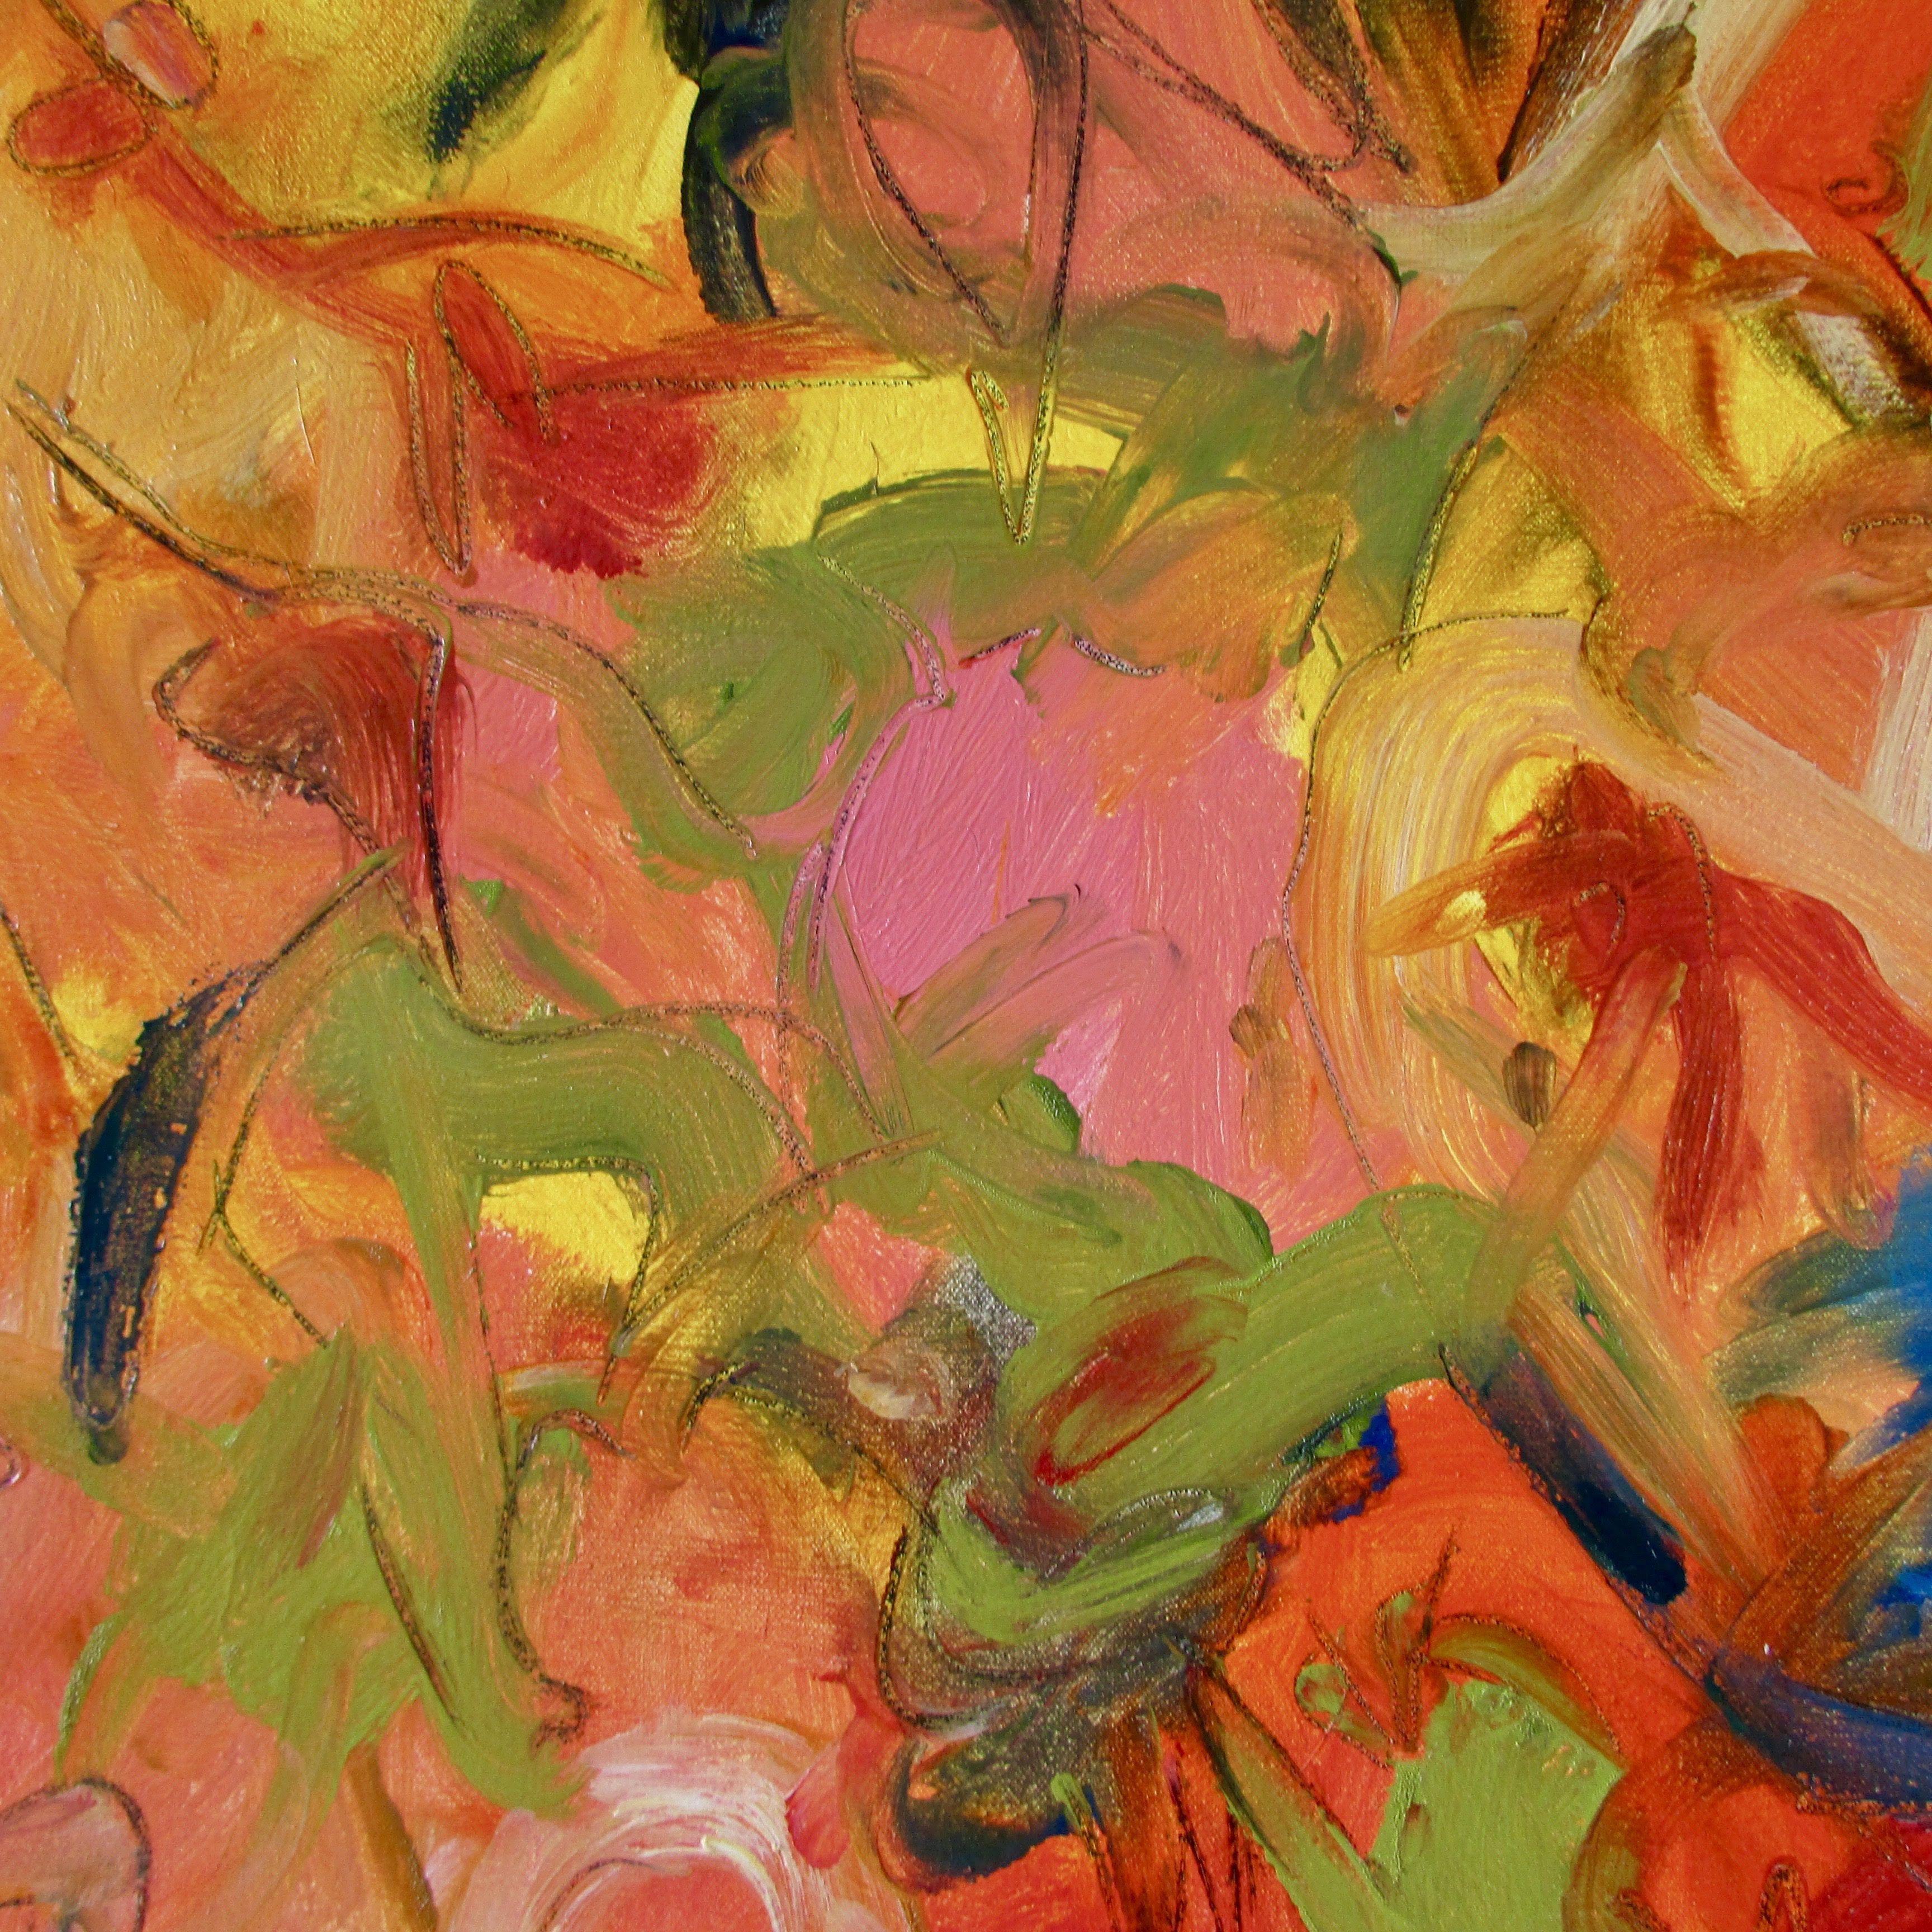 Abstract Oil On Canvas Inspired By Nature, Life, Love, Joy And Dreams. My Abstract Paintings Are All About Creating Excitement For The Viewer Through Concentrated Exploration. Each Painting Is Inspired By Nature, Travels, Or Imagination And Created